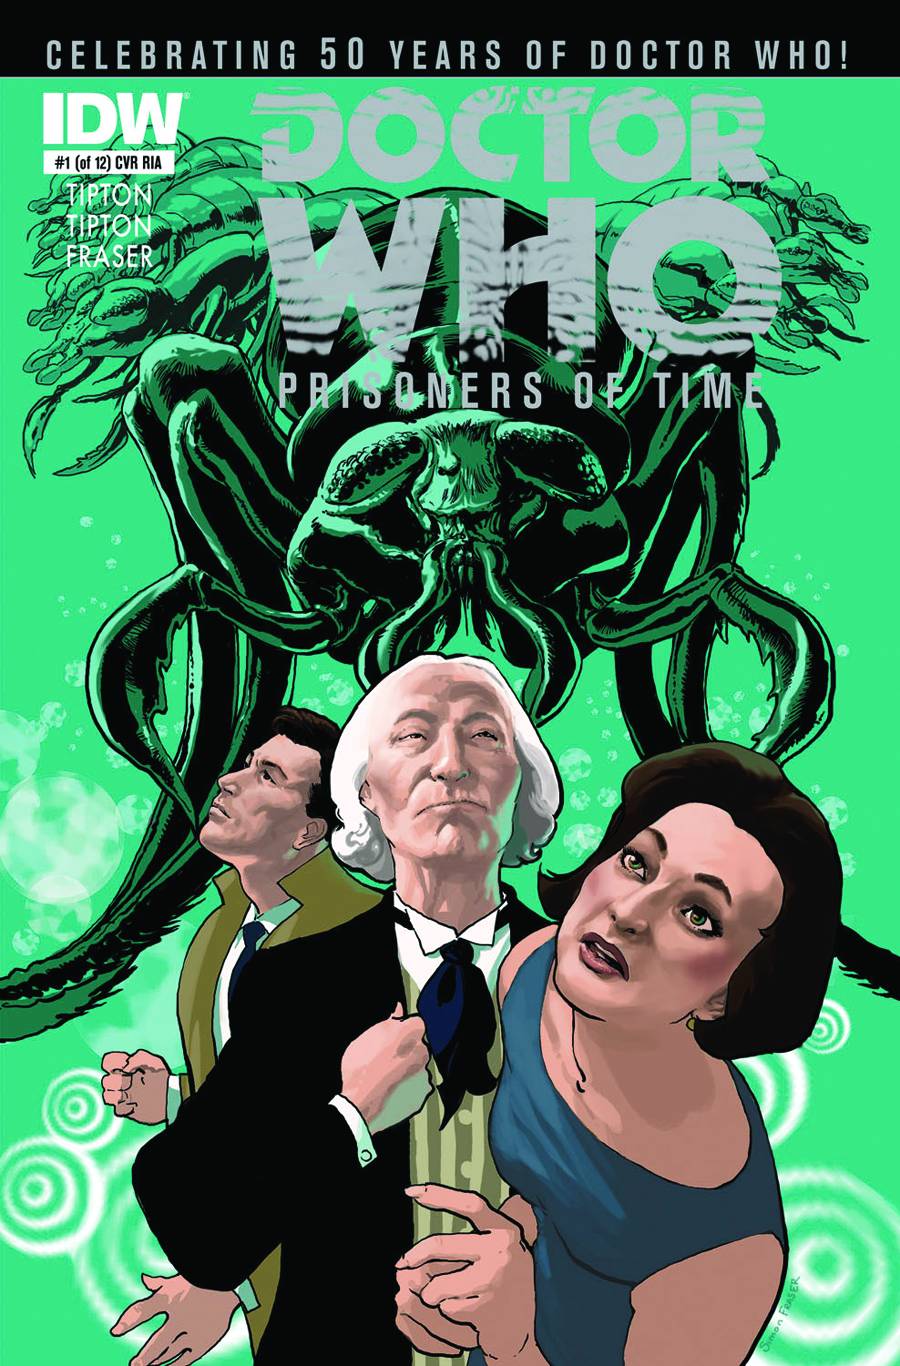 Doctor Who Prisoners of Time #1 1 for 10 Incentive